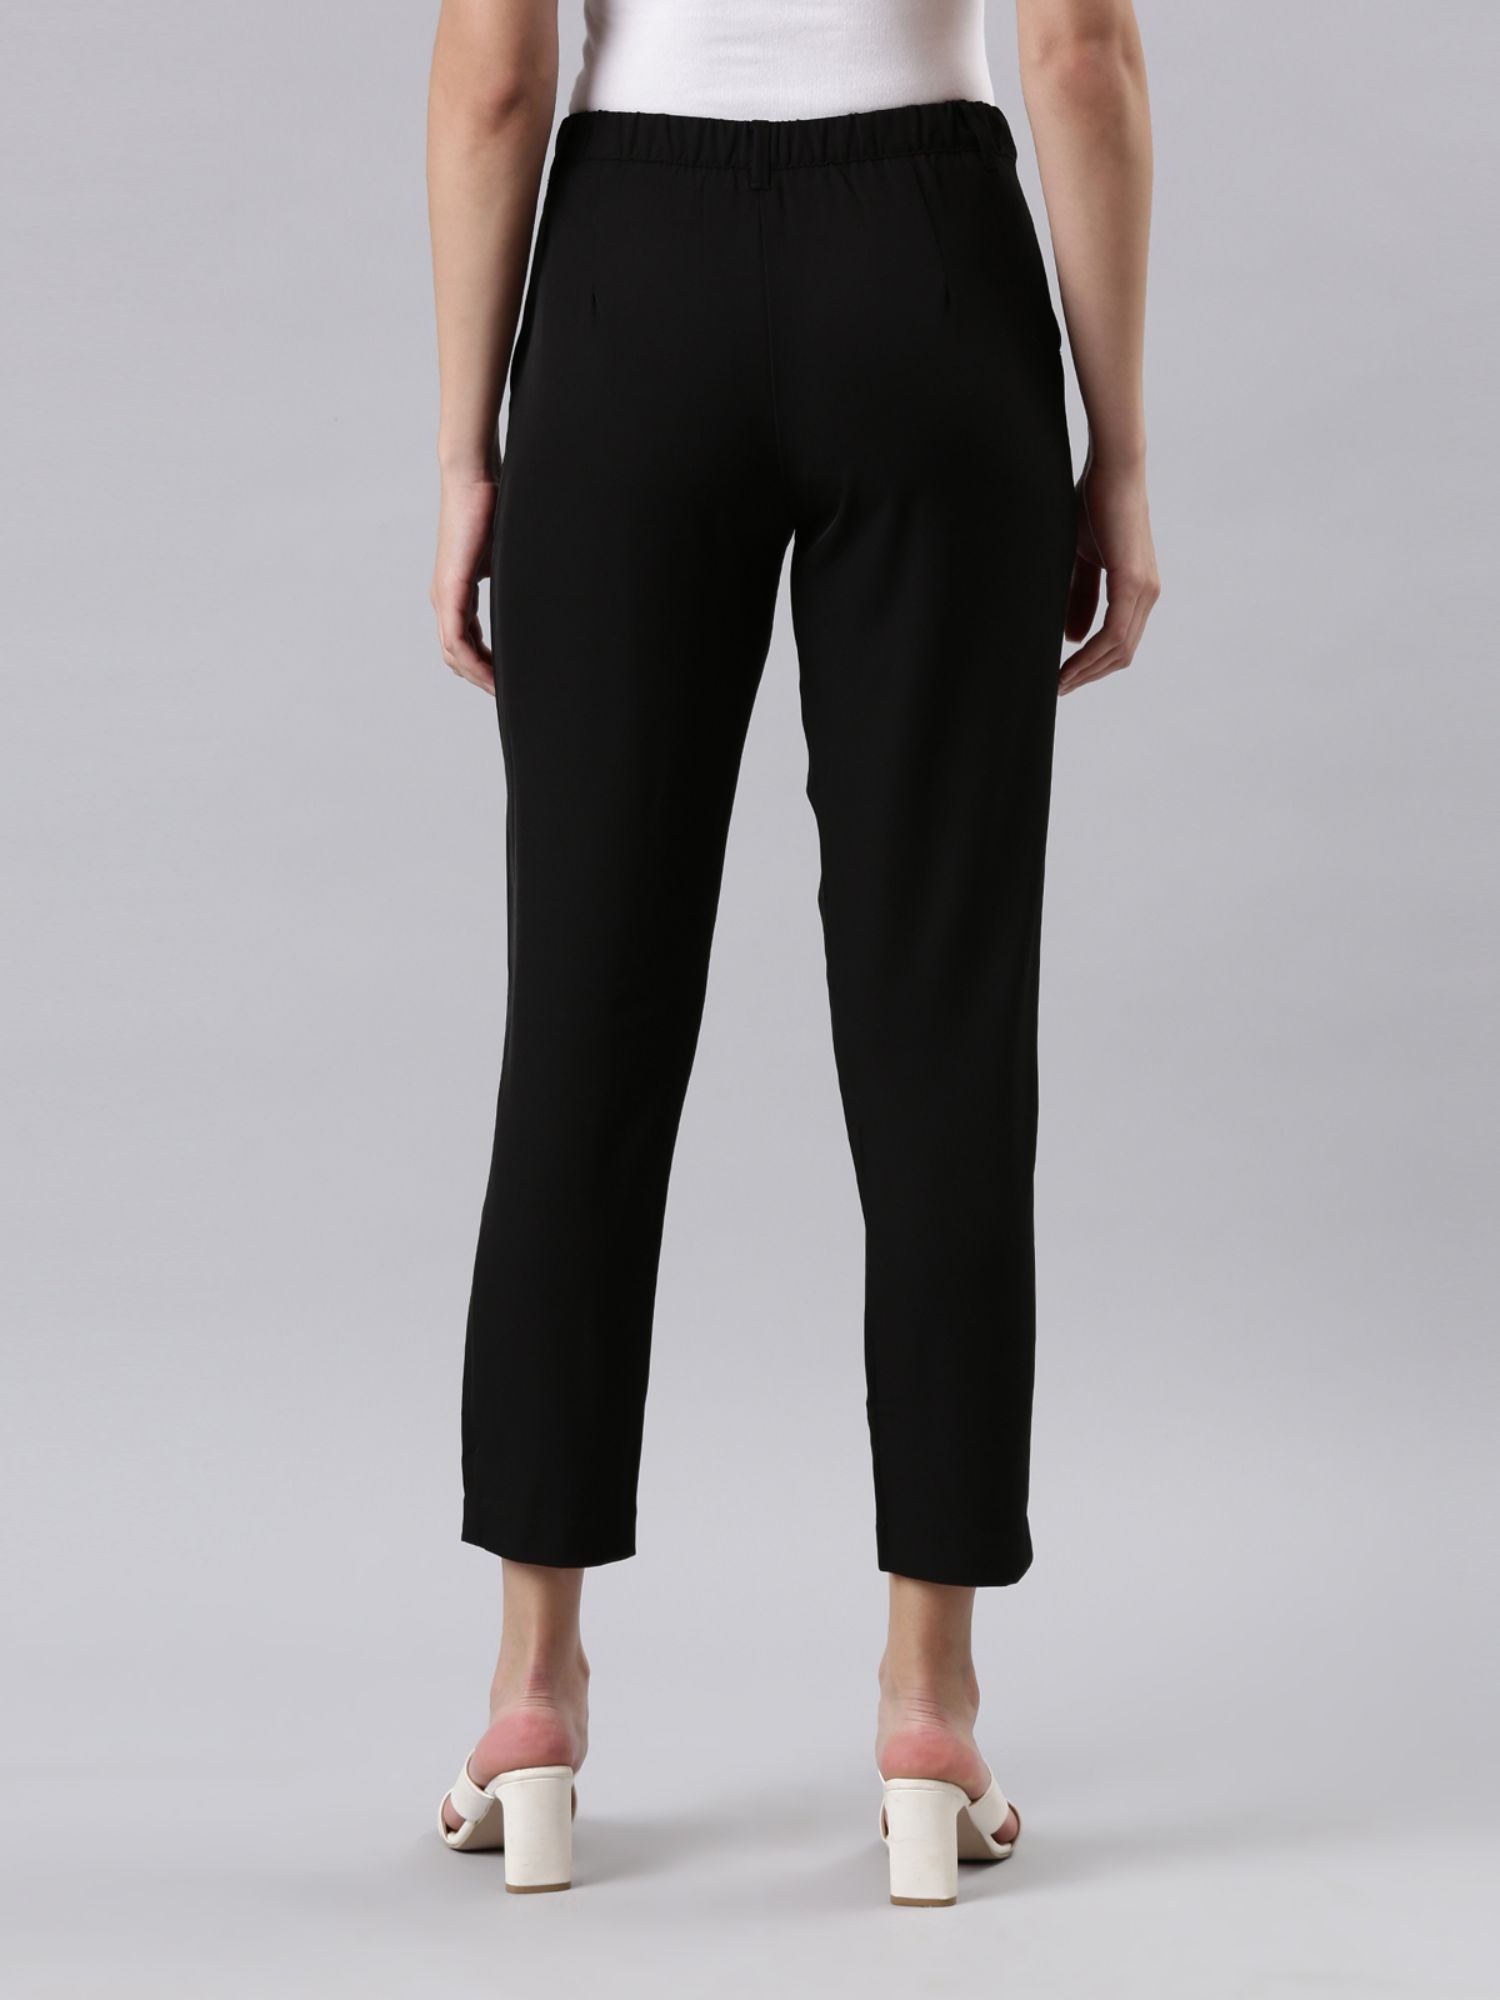 40% off on G.Couture Ladies Formal Black Pants | OneDayOnly